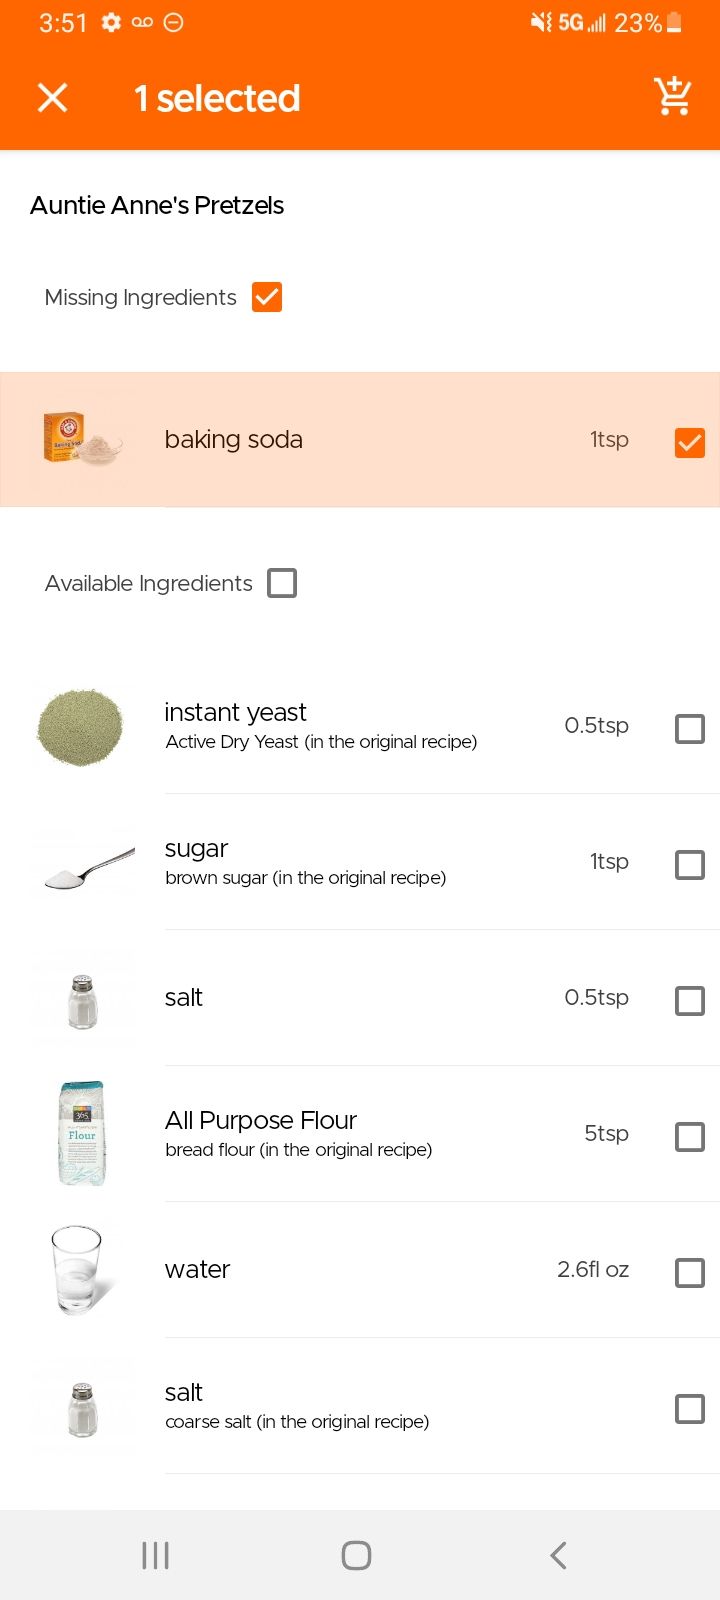 Shopping for ingredients with the KitchenPal app.